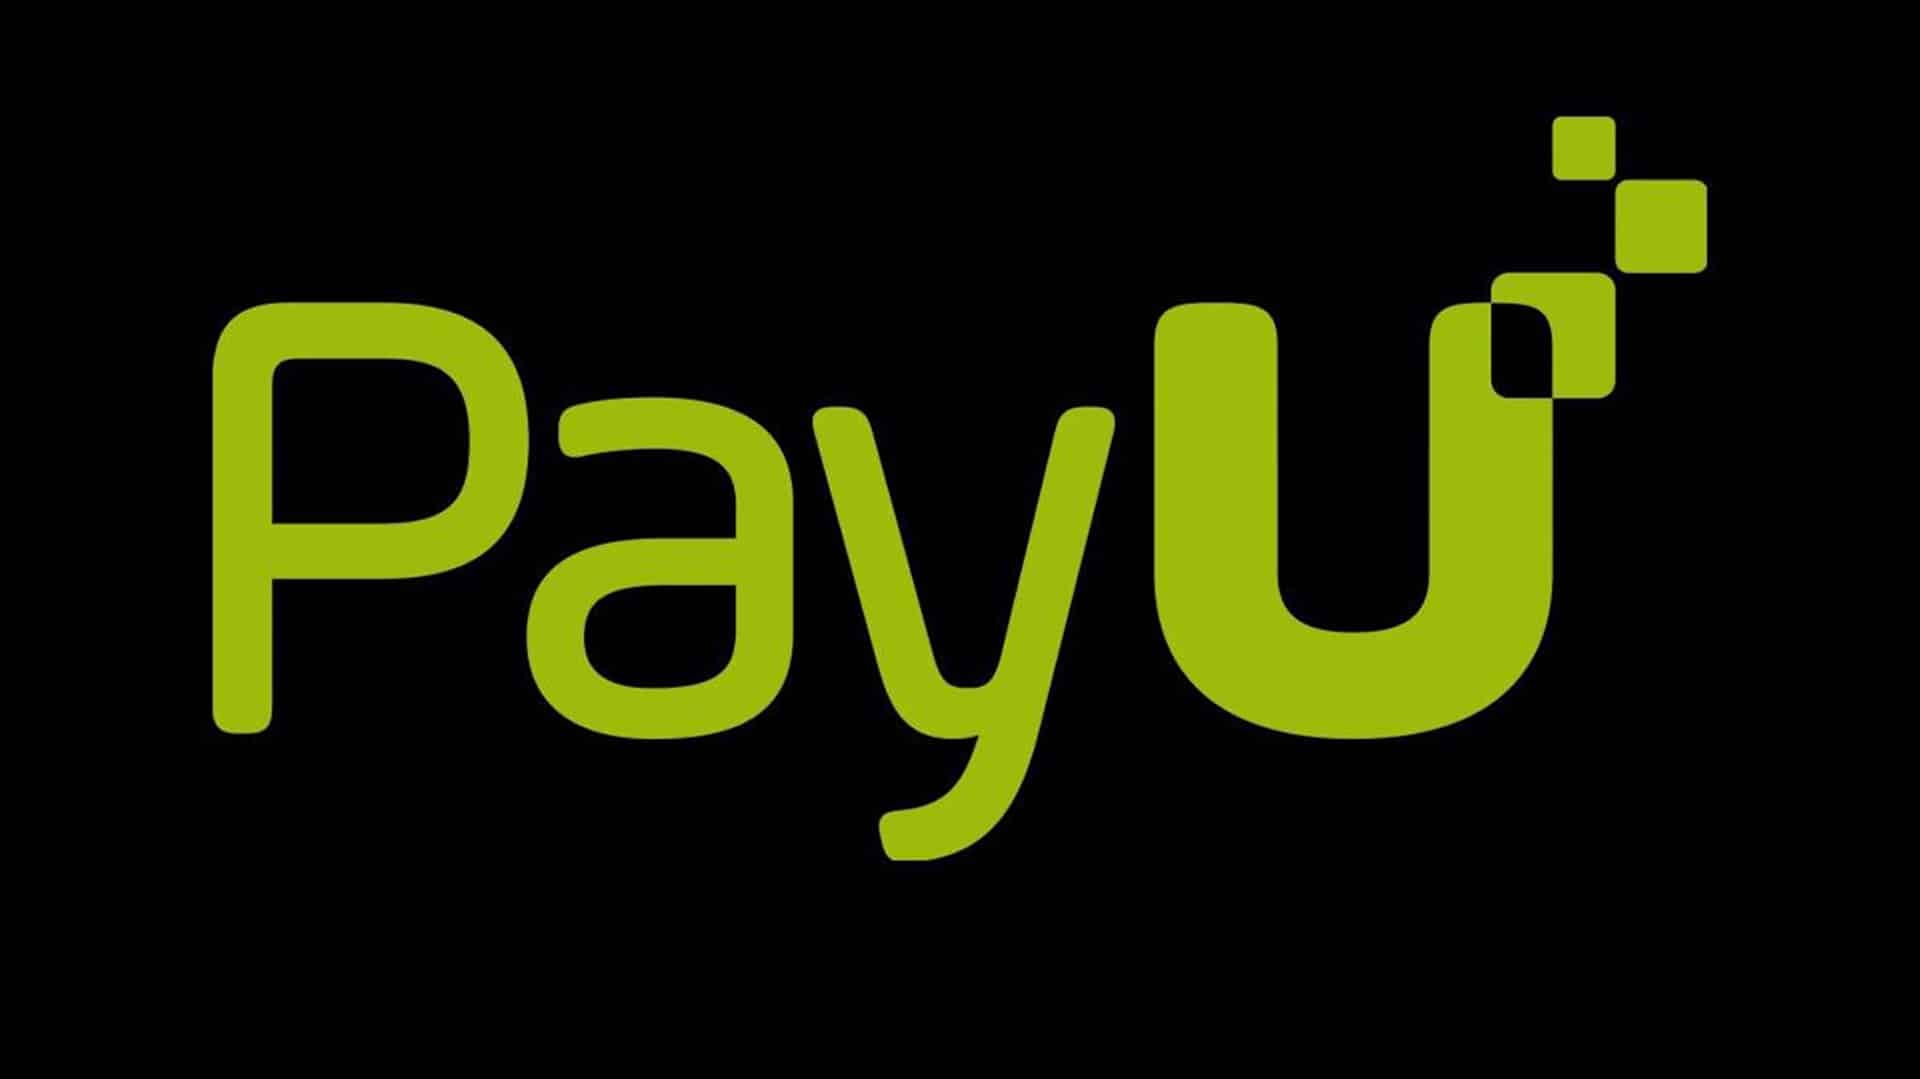 PayU announces integration with BigCommerce to boost SMB digitalization